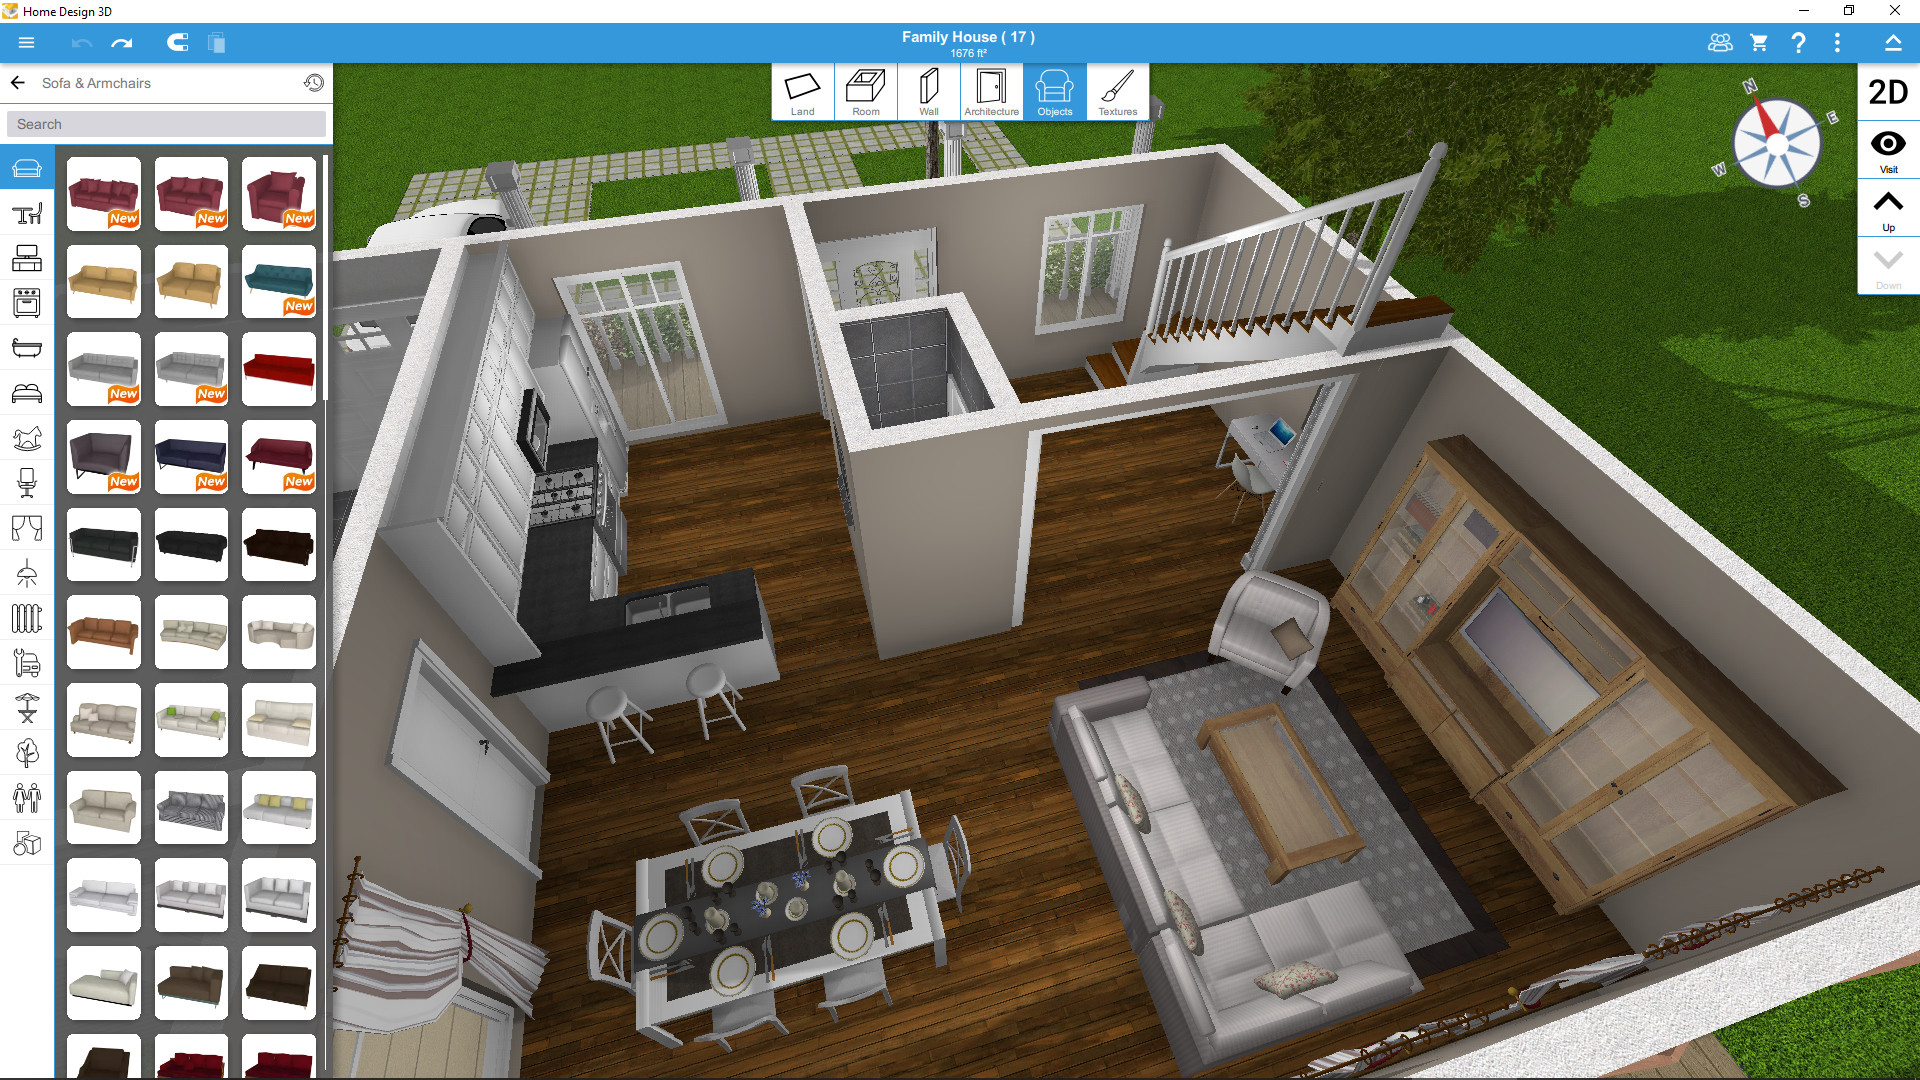 Home Design 3D Steam Discovery